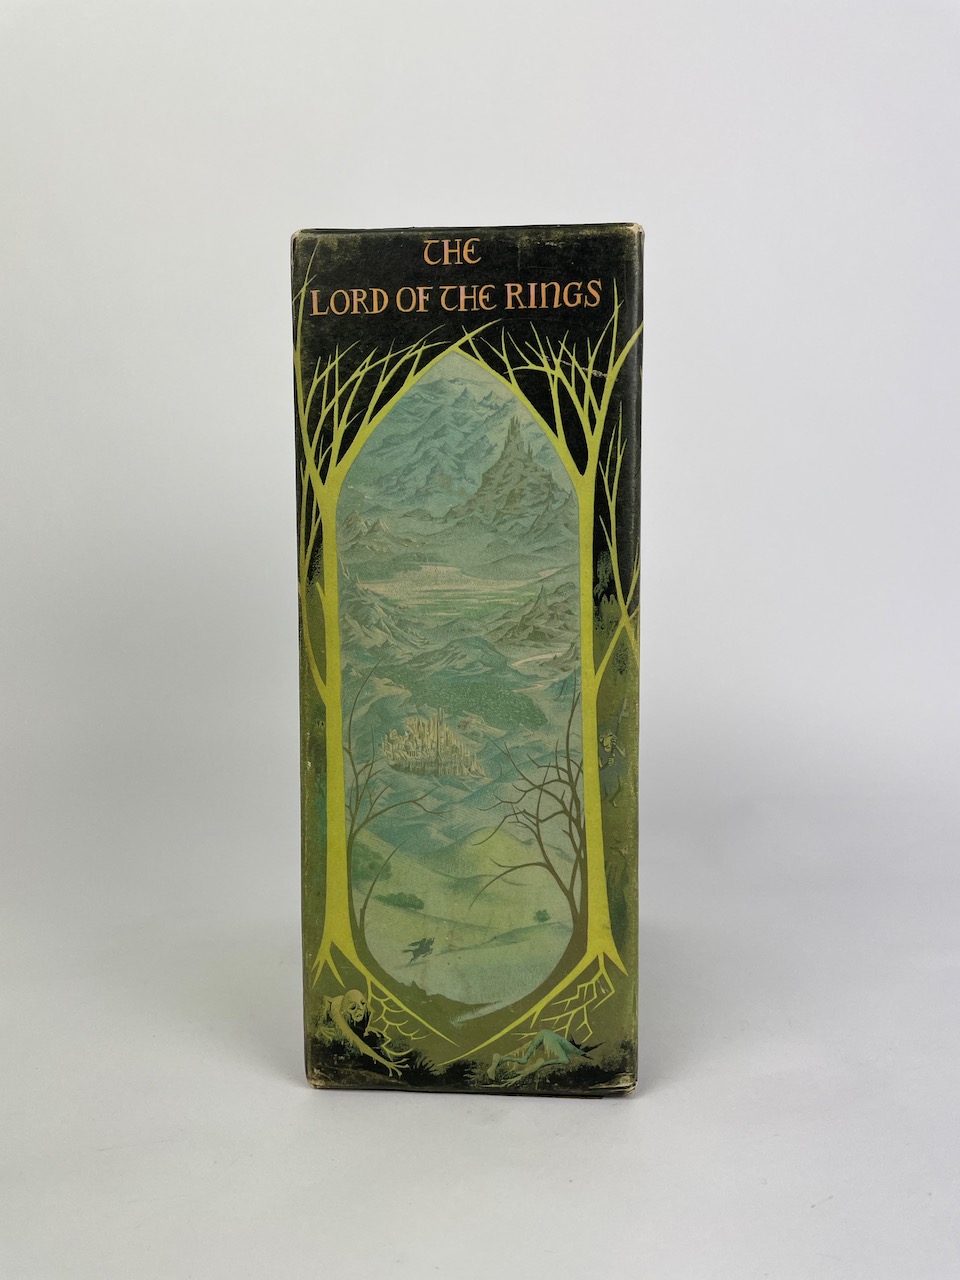 
1963 1st UK Lord of the Rings Deluxe Edition 6